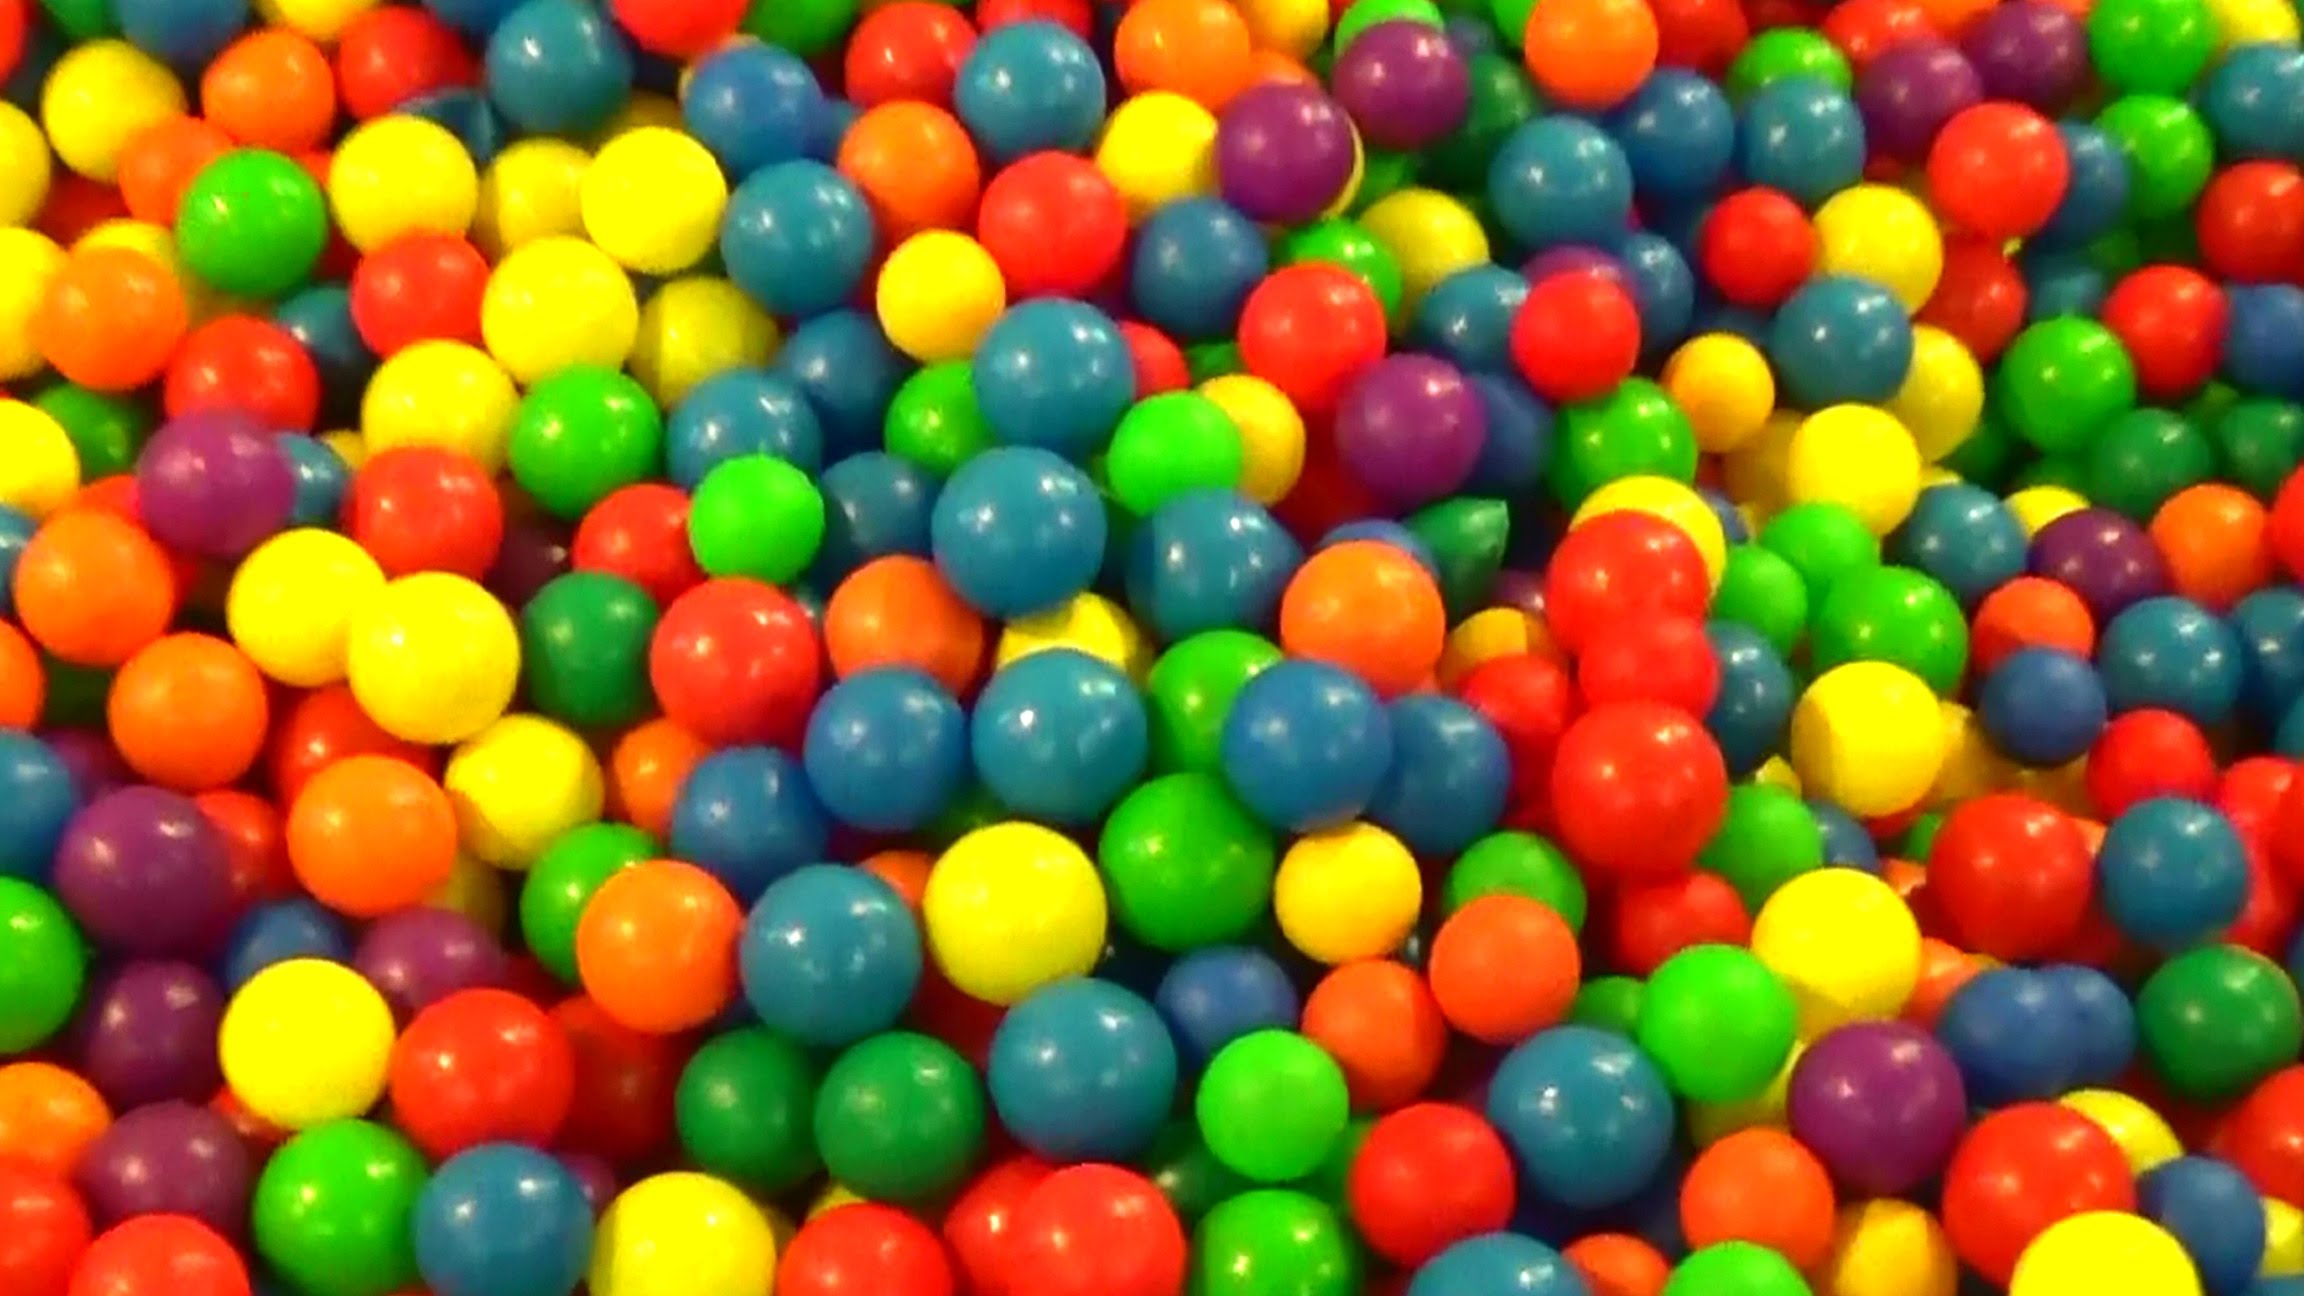 Ball Pit Show Indoor Playground Fun for Kids Learn Colors with Balls ...